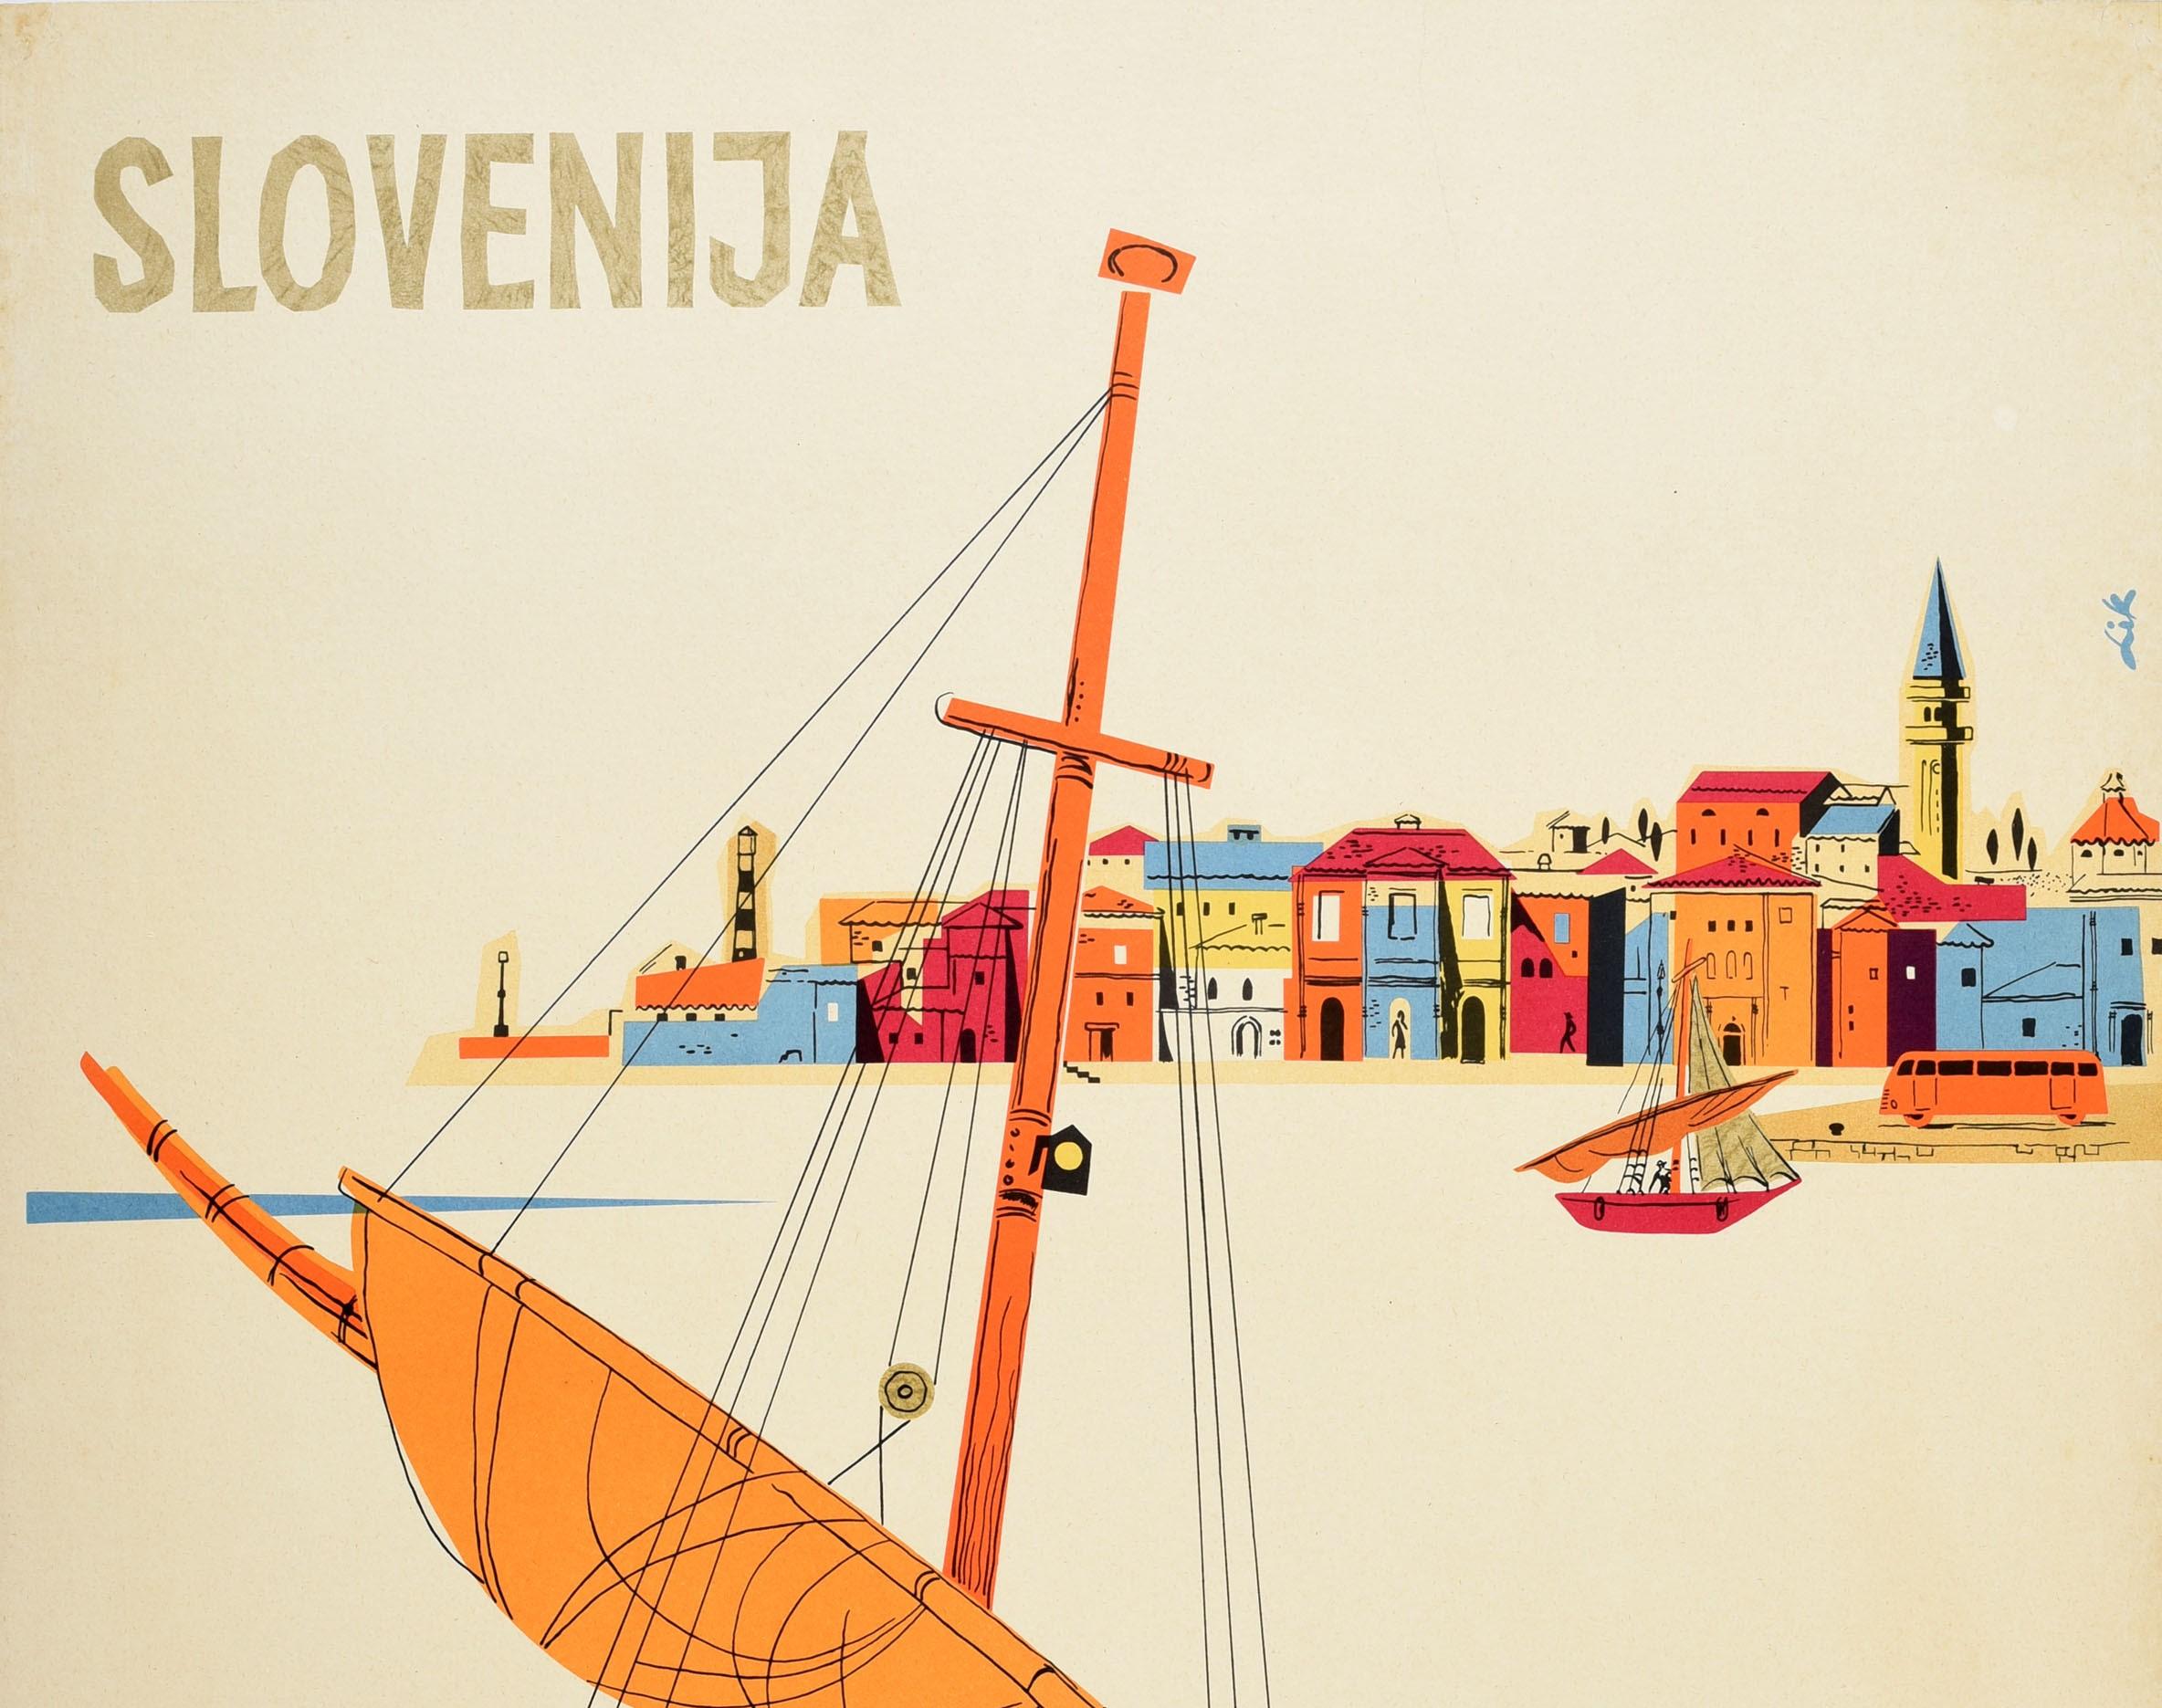 Original vintage travel poster for Slovenia Yugoslavia / Slovenija Jugoslavia featuring a colourful illustration of a lady in a bikini on a wooden sailing boat, holding onto the ropes and looking at a man in the sea holding up a fish caught on a